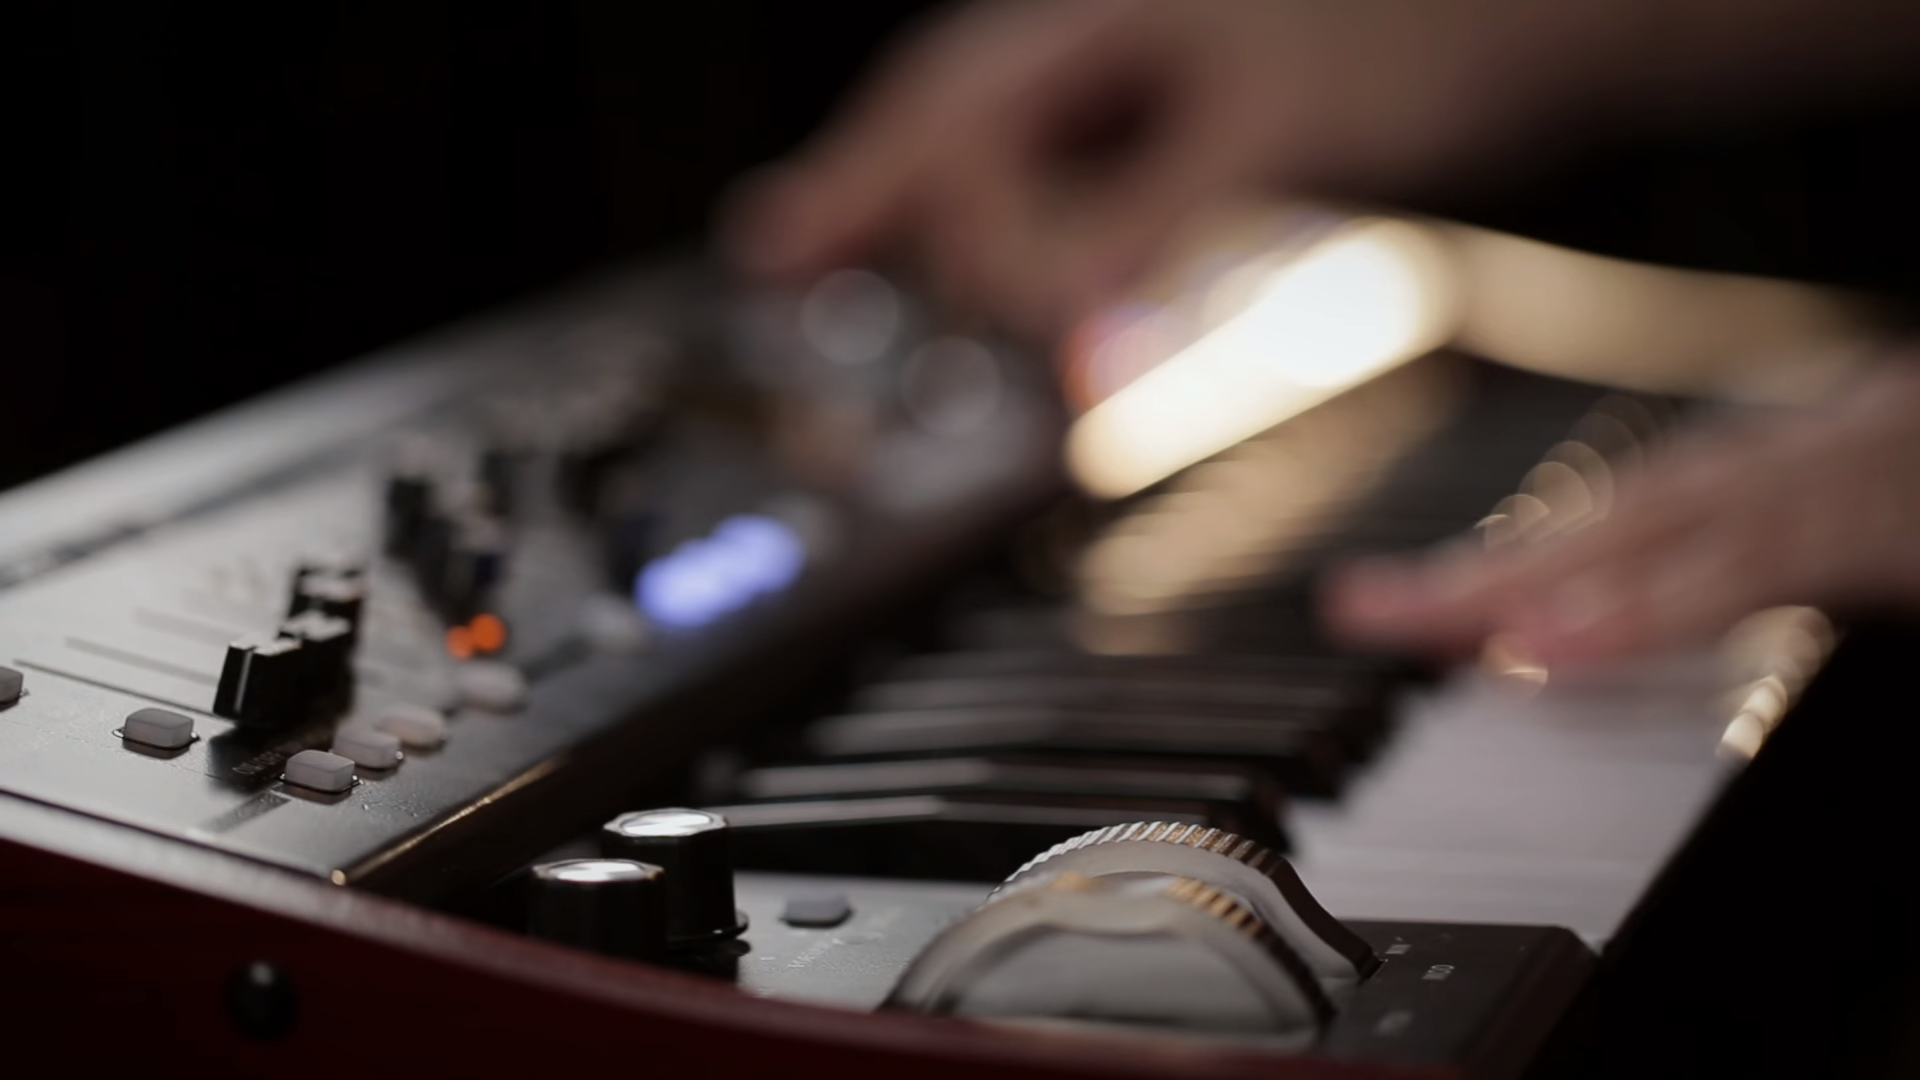 Behringer are teasing a new Synth, here’s what we know so far